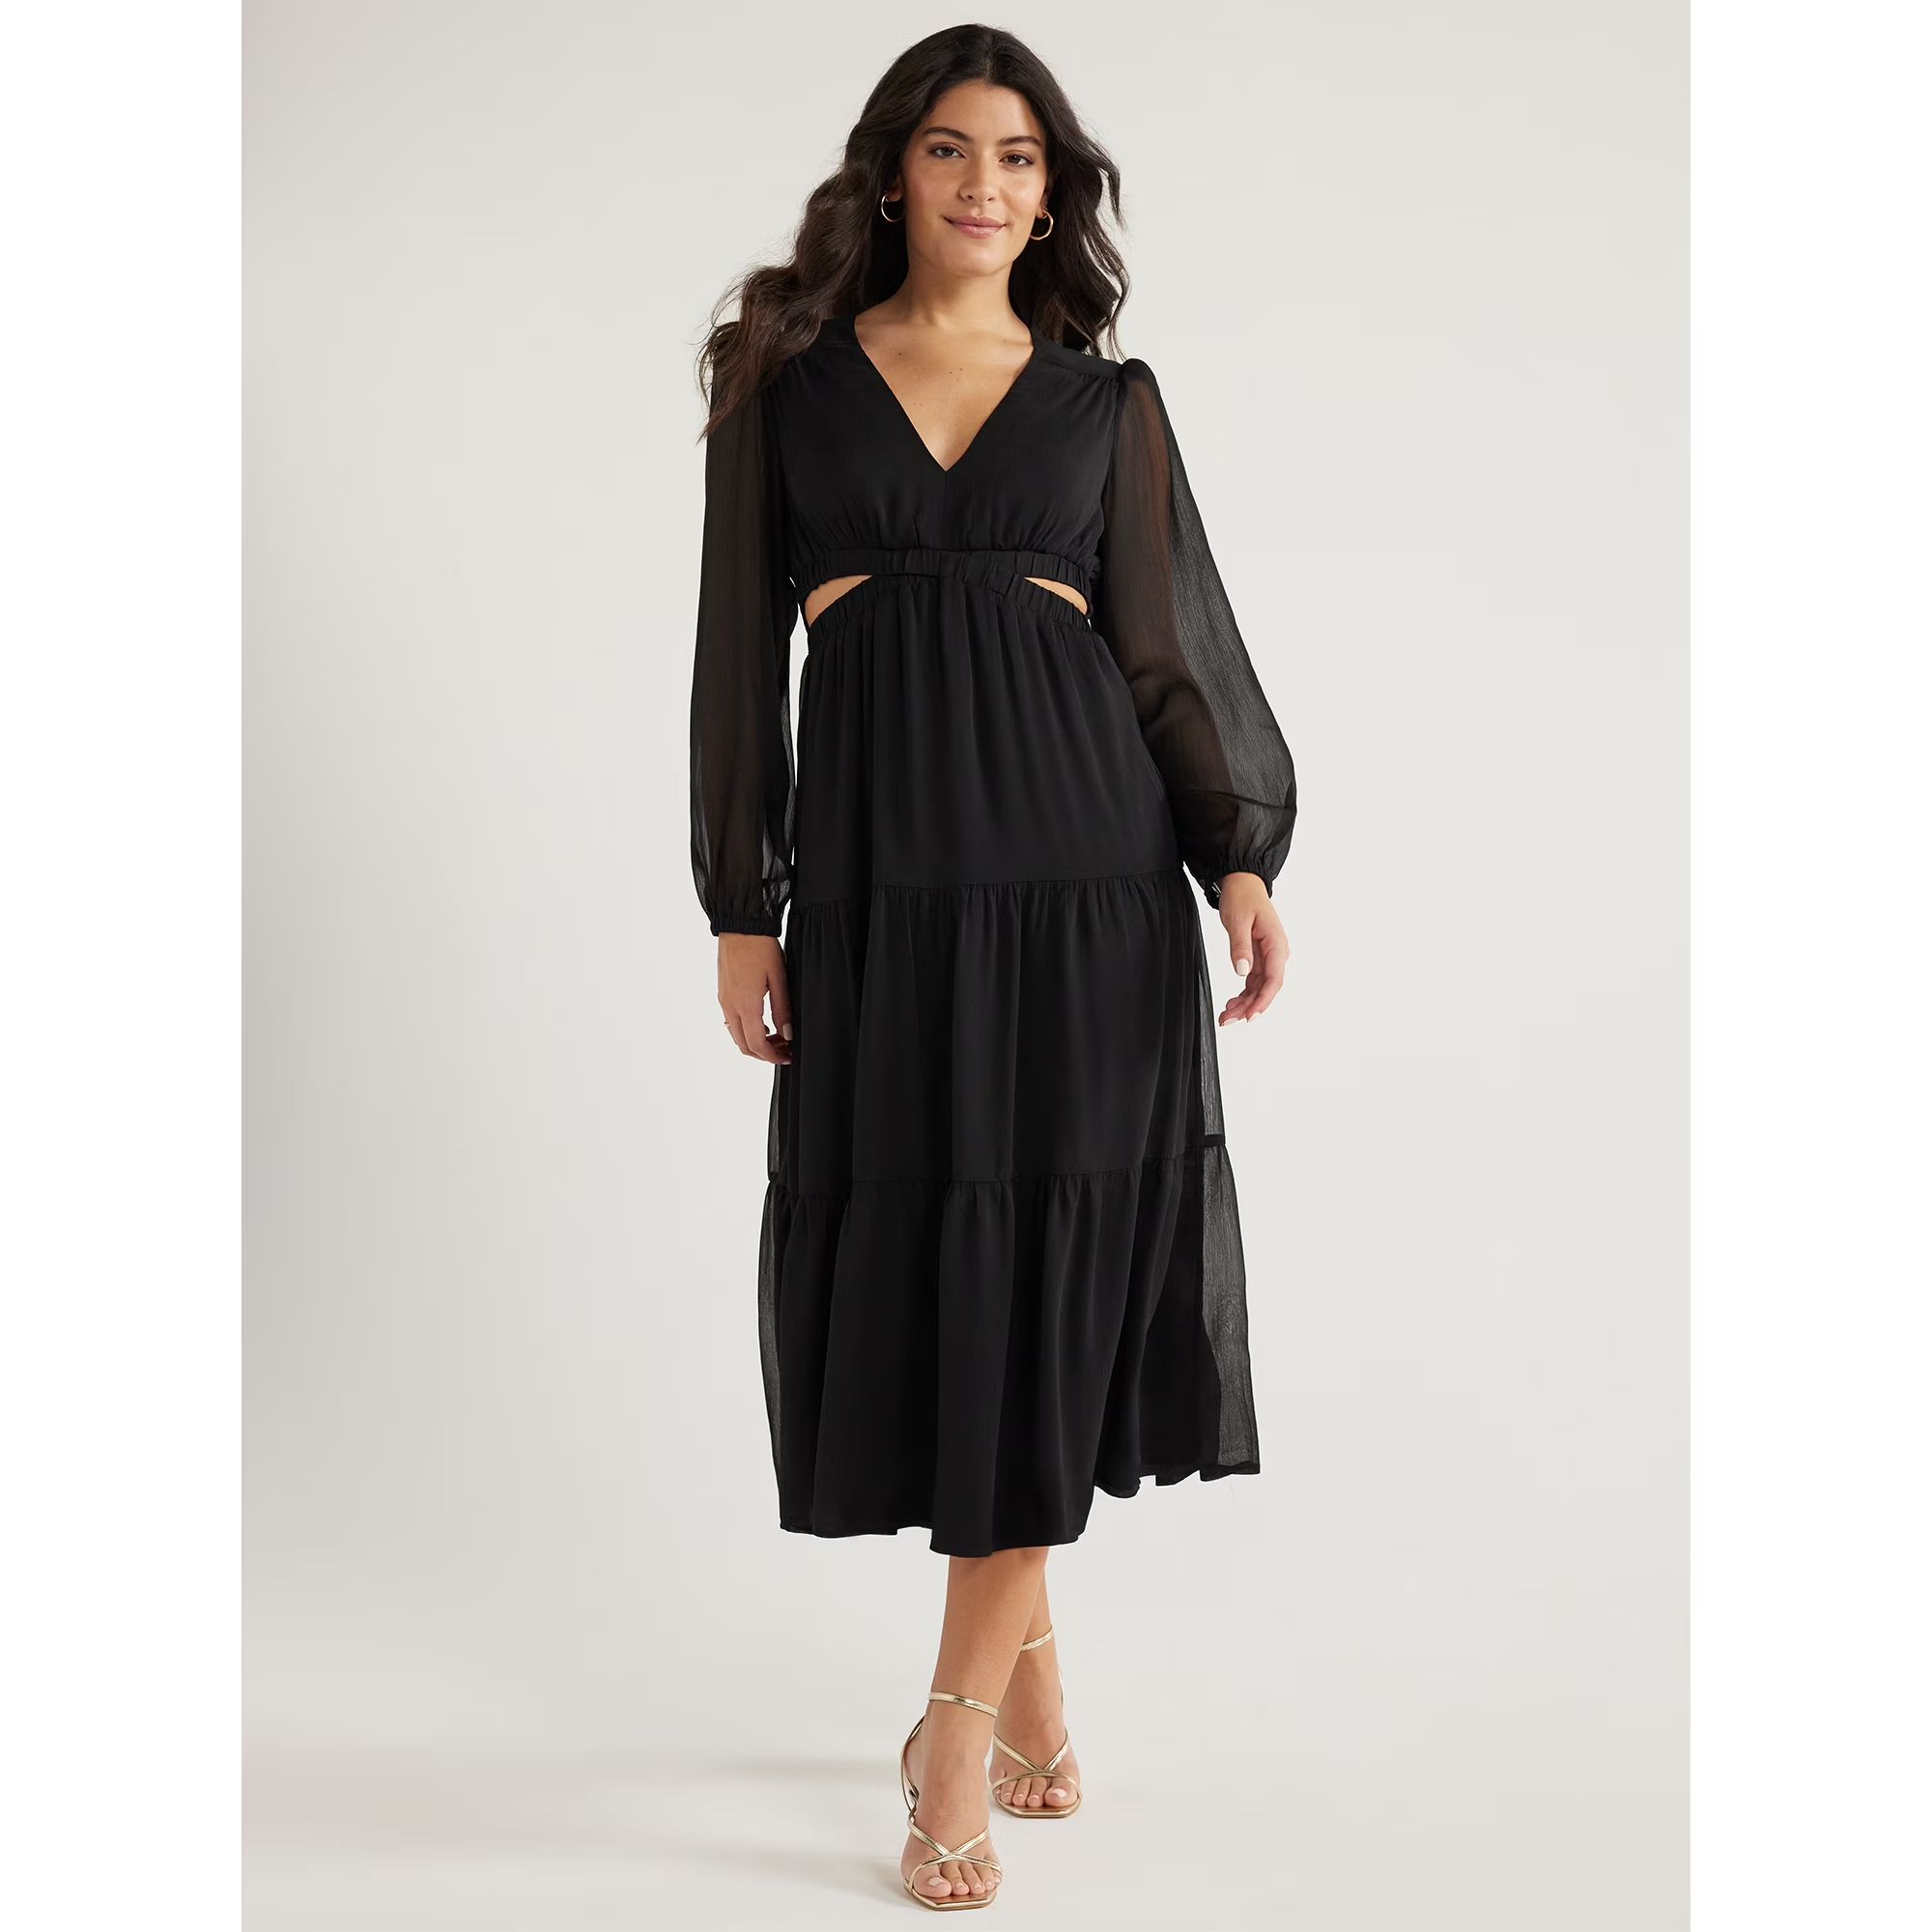 Sofia Jeans Women's Cutout Maxi Dress with Long Sleeves, Above Ankle Length, Sizes XS-3XL | Walmart (US)